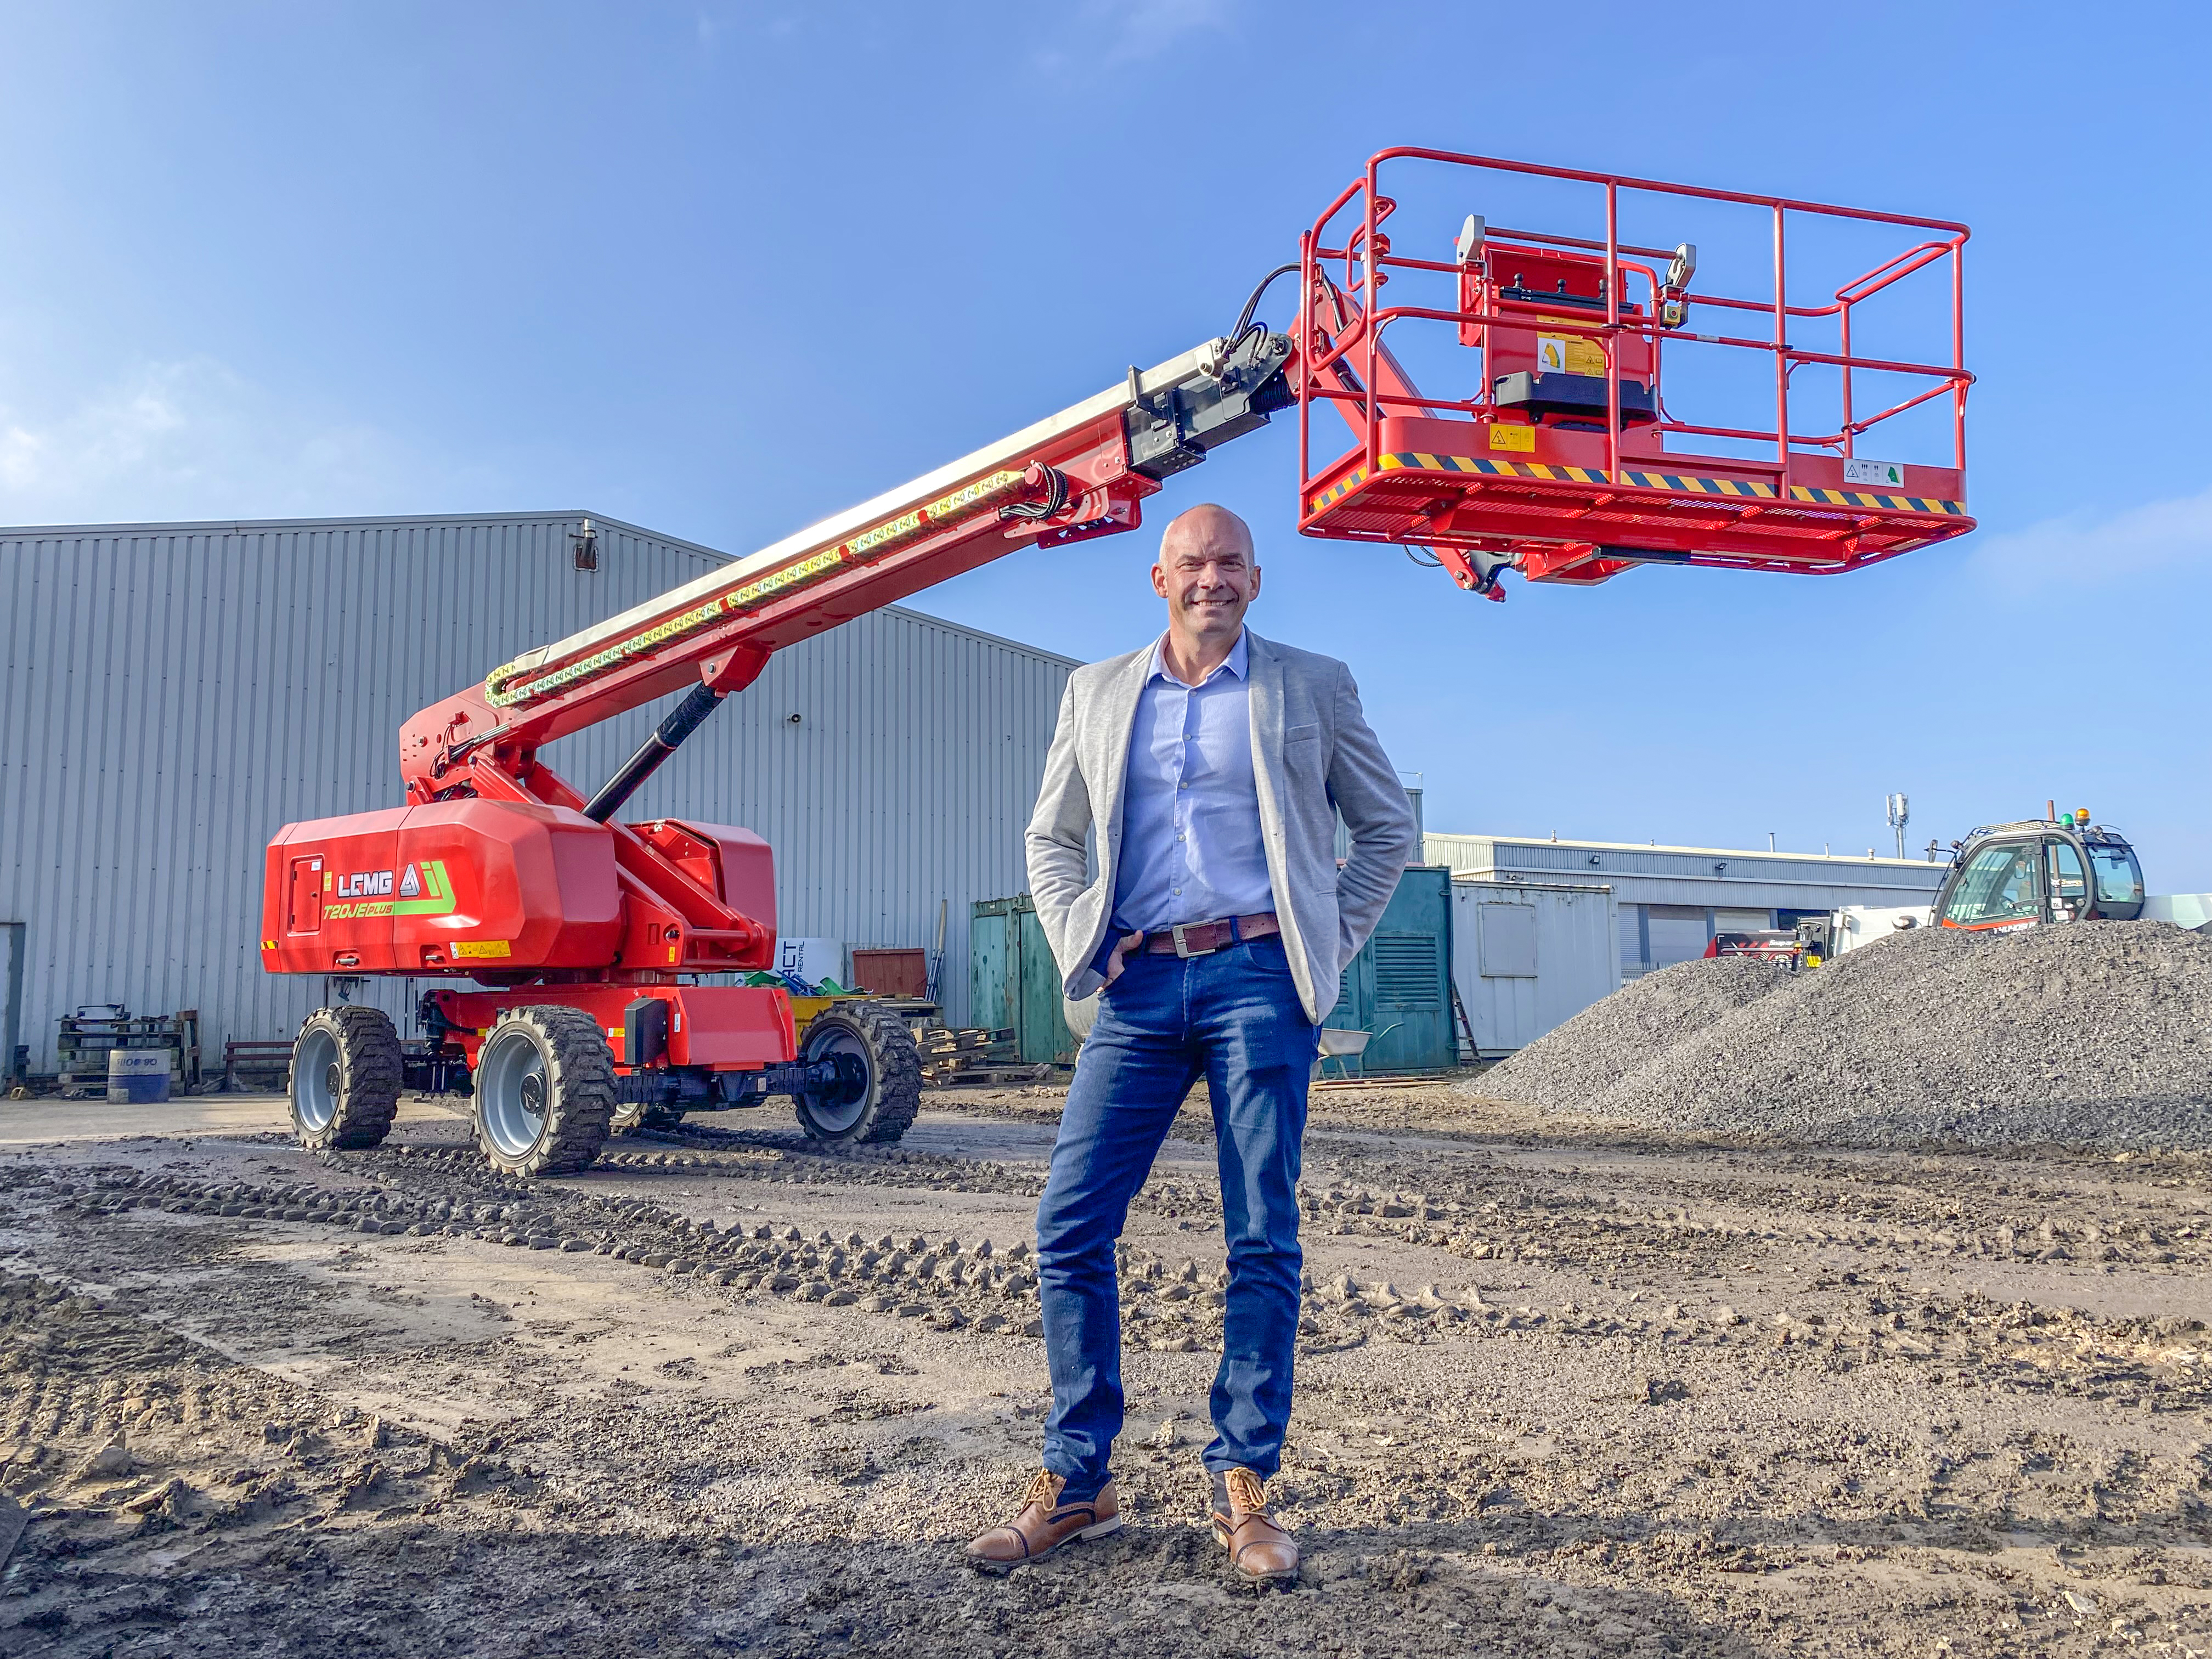 Contract hire specialist promotes ‘rise of lithium’ with LGMG booms